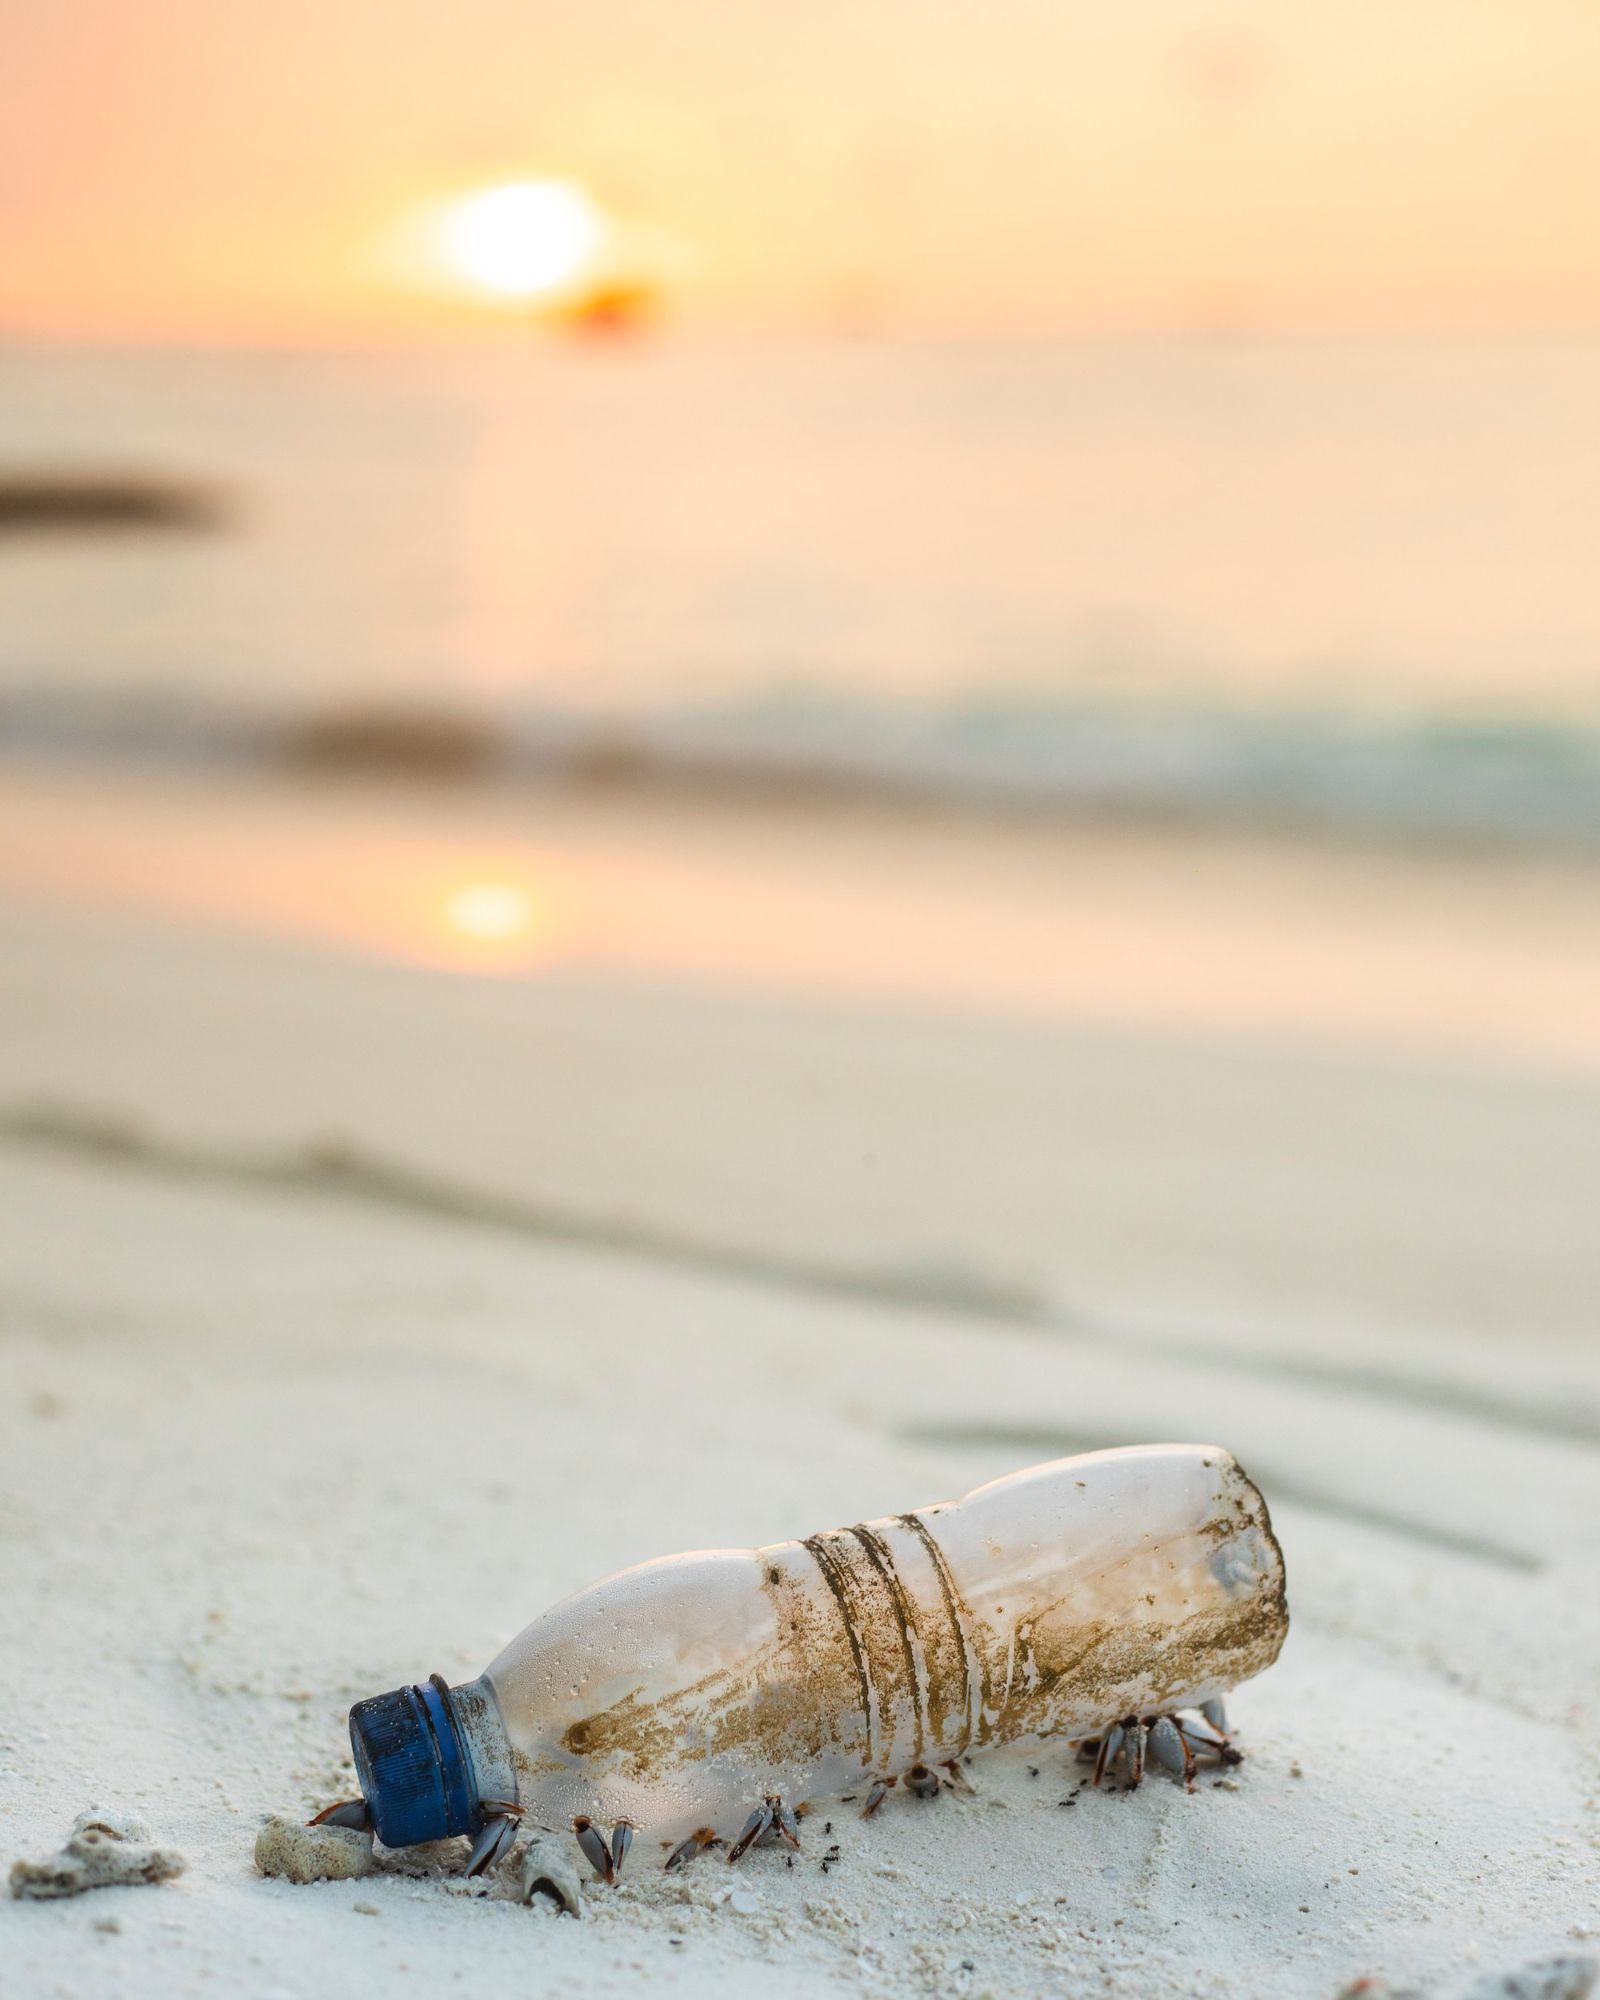 Plastic bottle litter washed up on beach